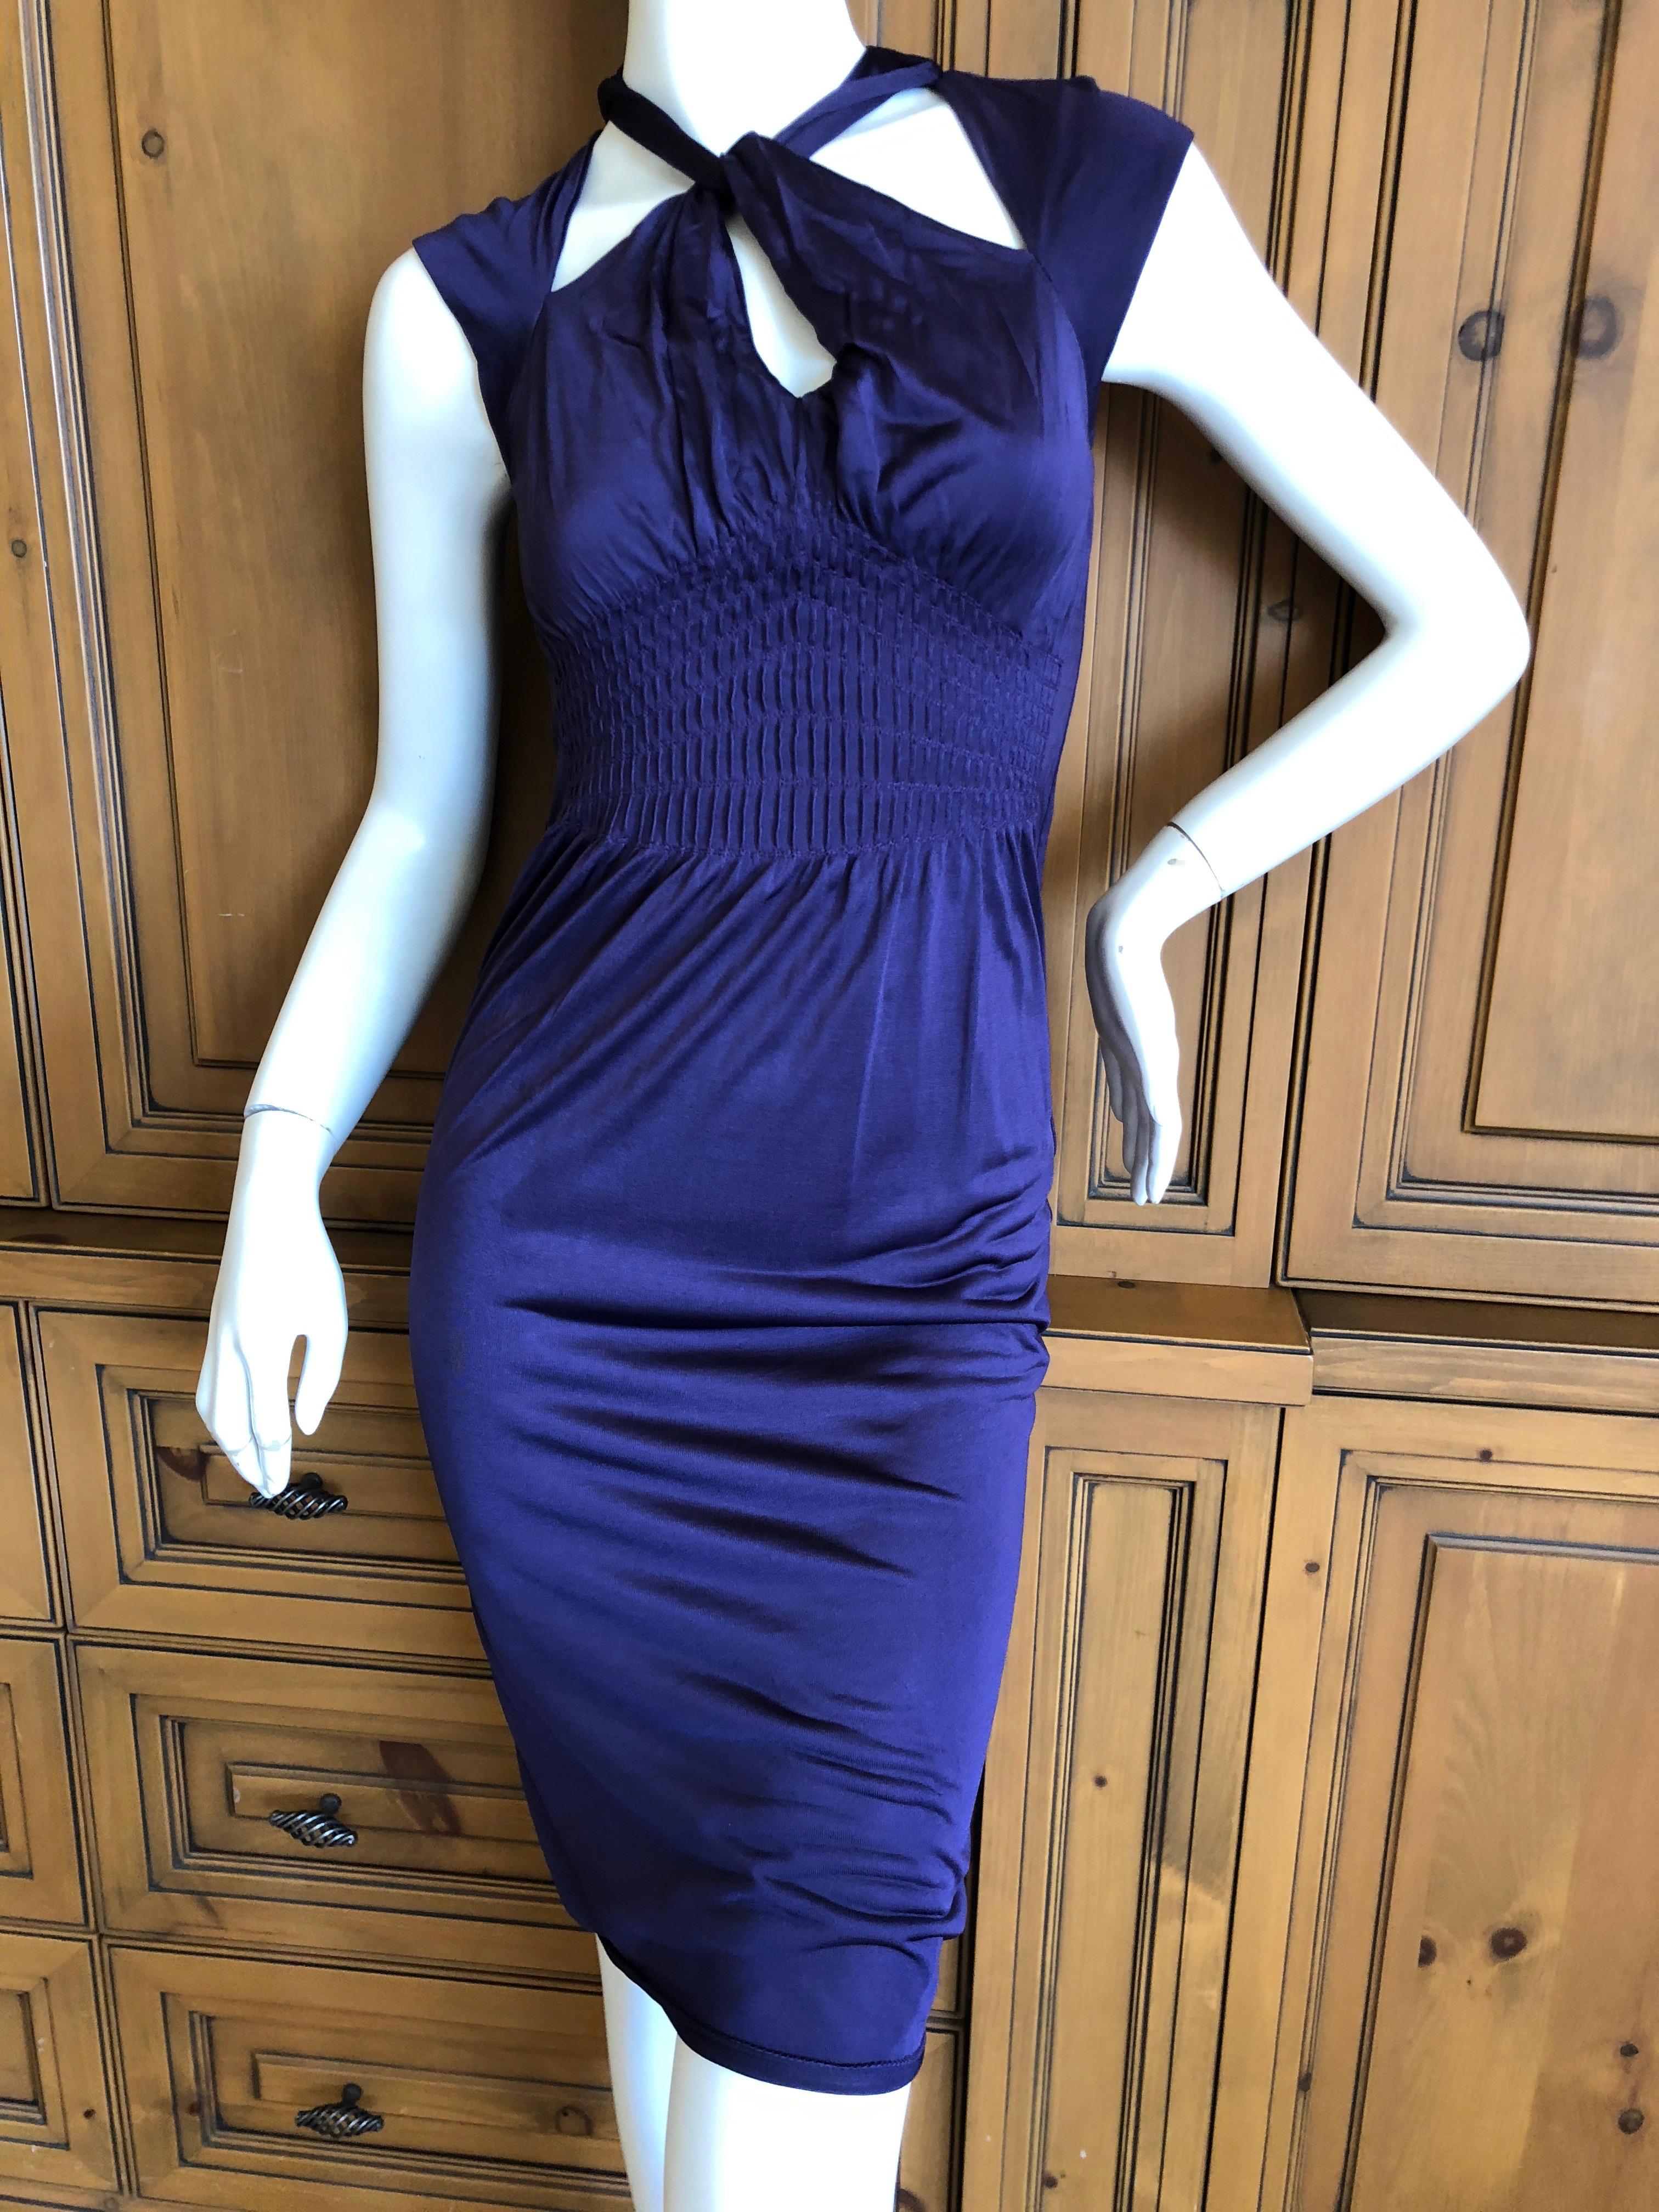 Gucci by Tom Ford Purple Backless Keyhole Dress.
So sexy, size XS, but seems to run large
Bust 36